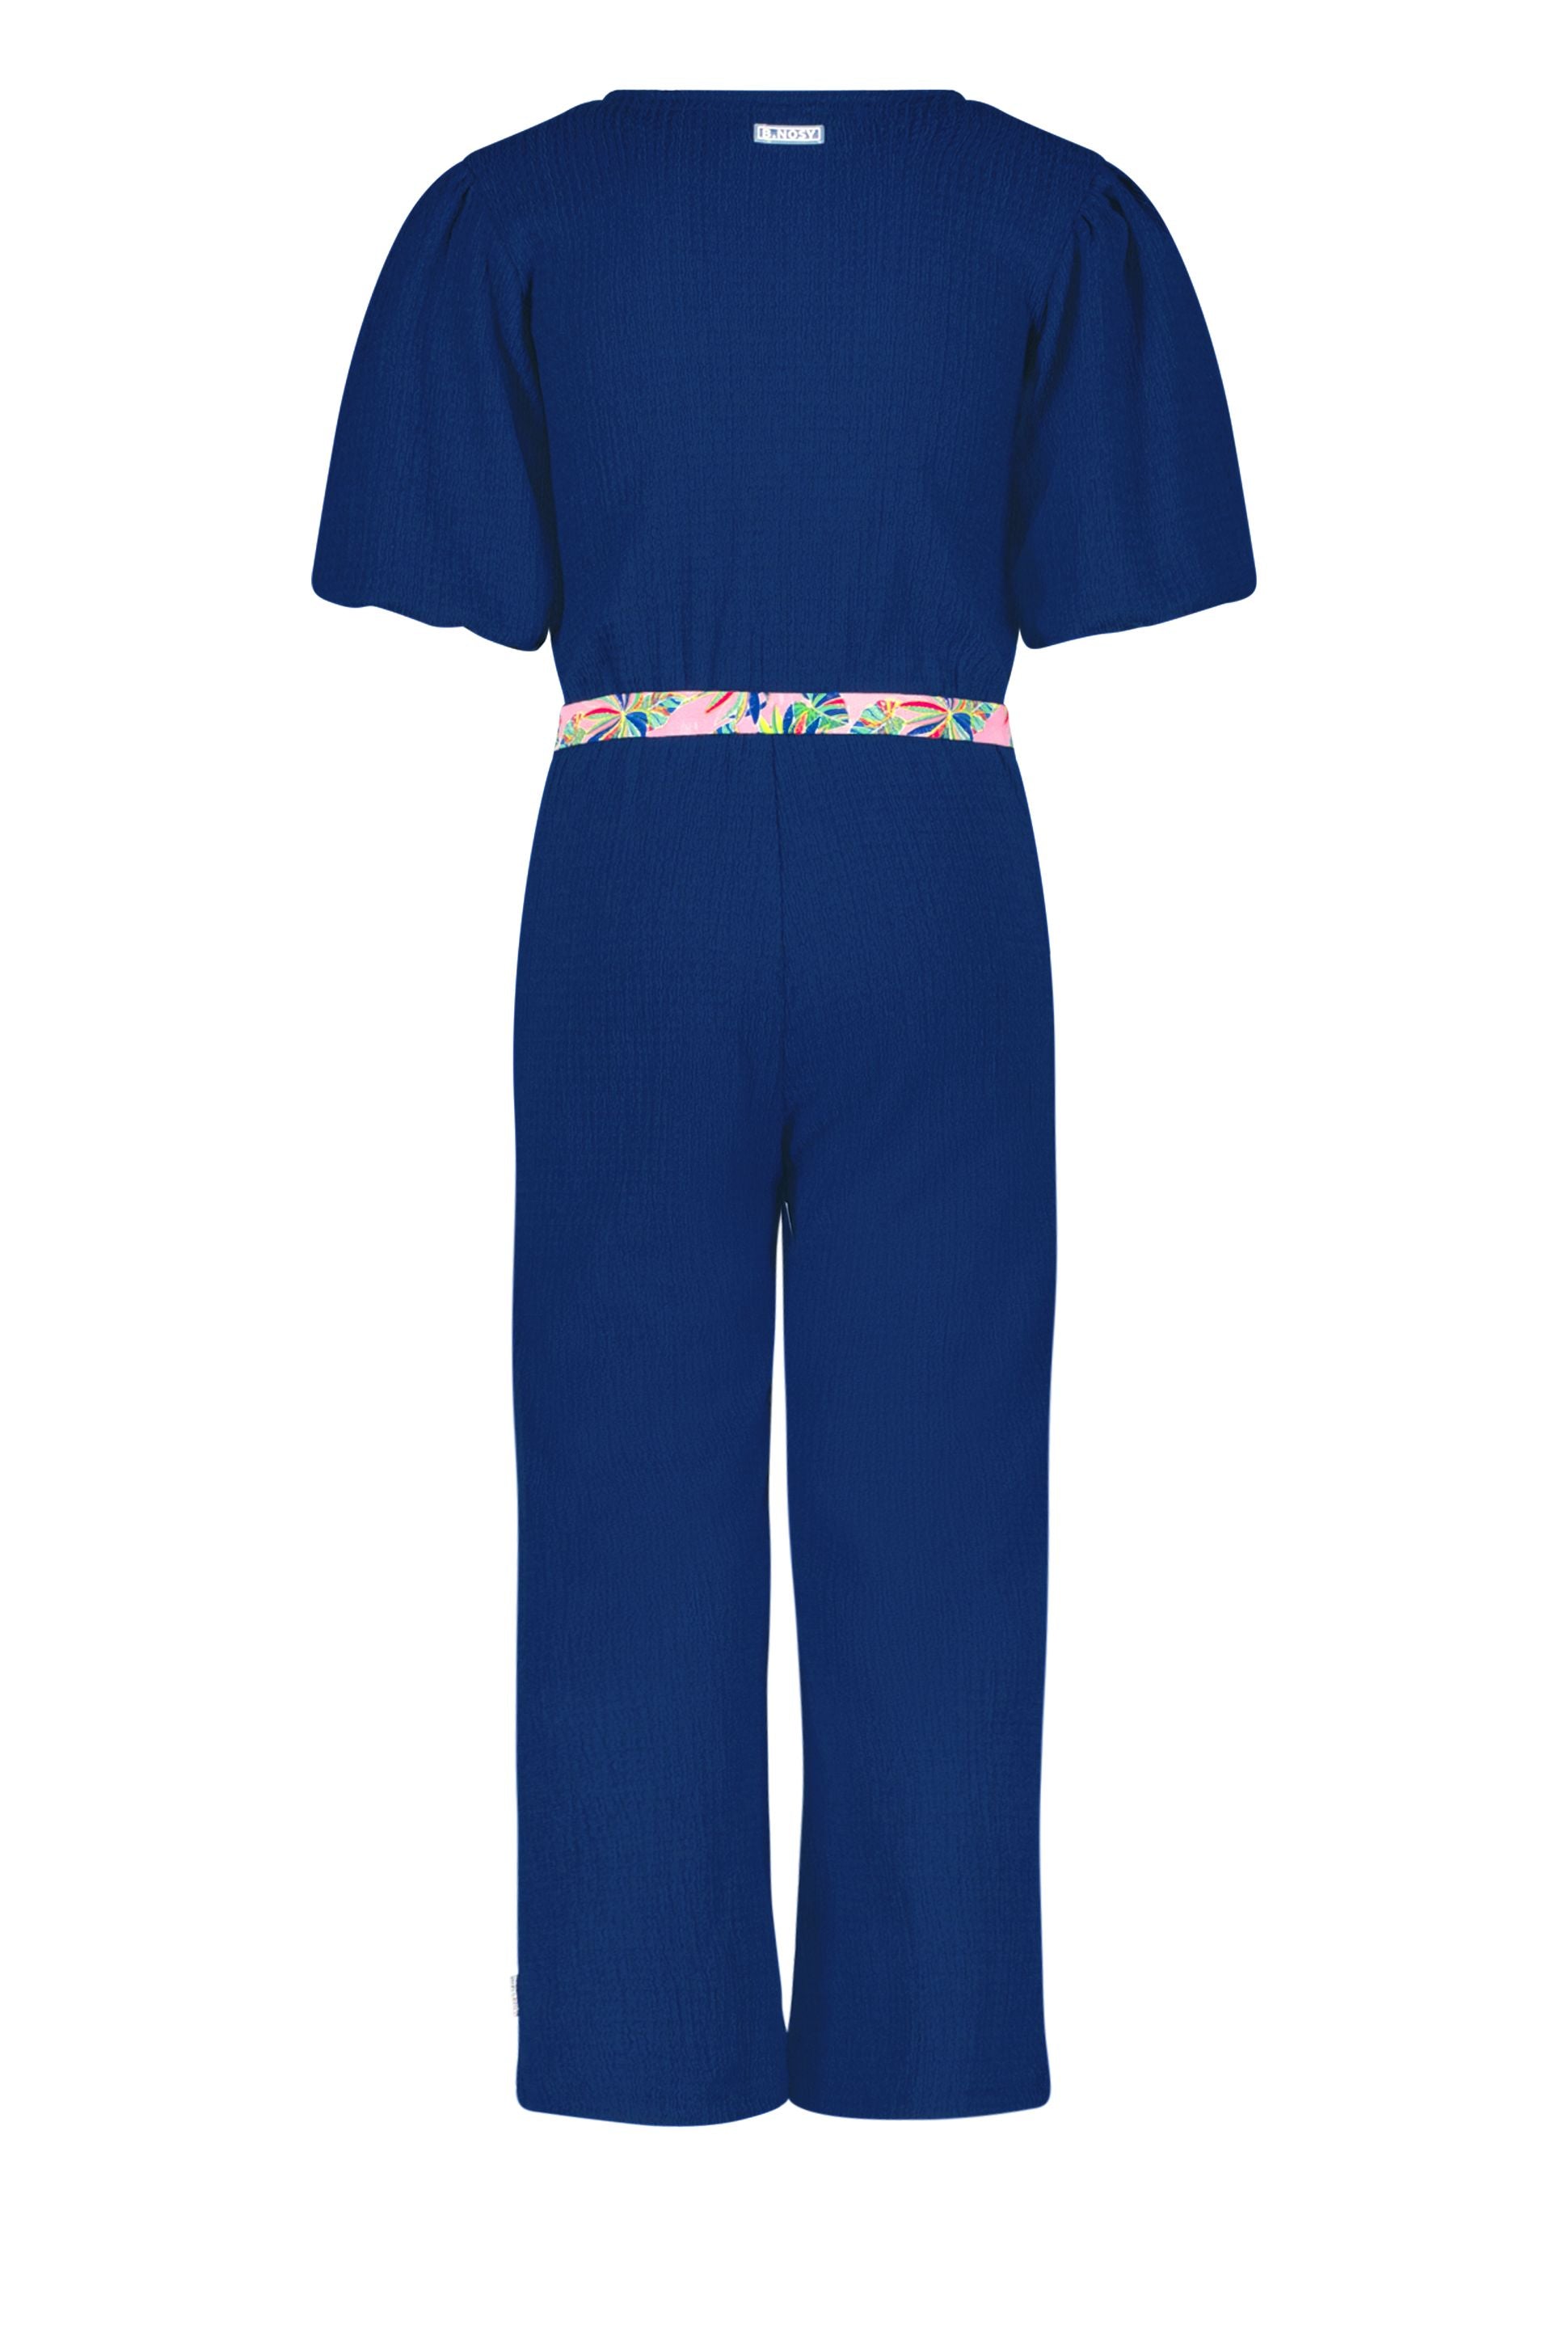 B.Nosy jumpsuit w/ puff sleeve and aop belt